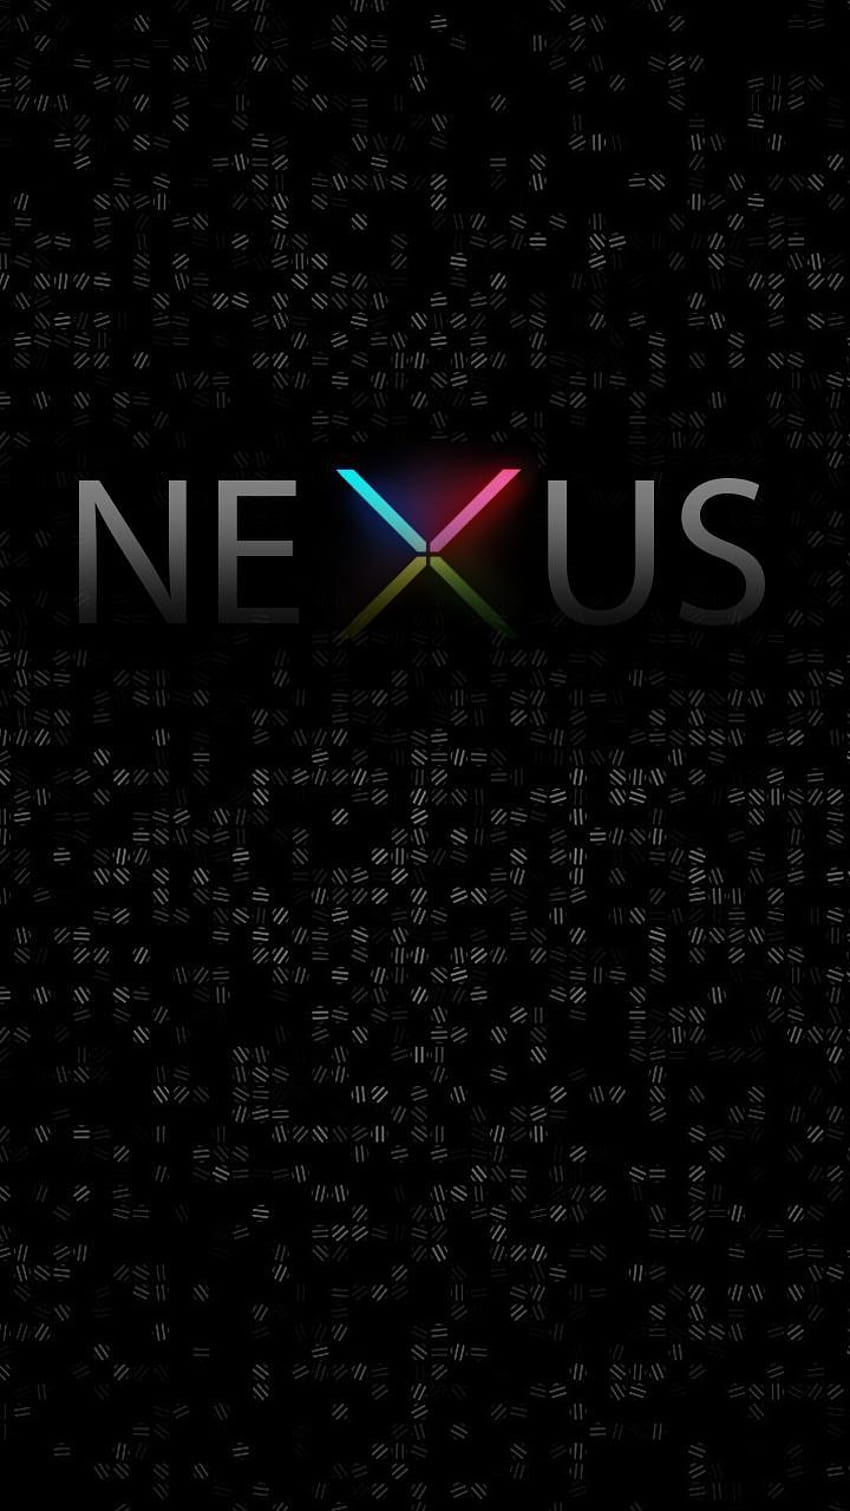 Download Nexus 5X & Nexus 6P Stock Wallpapers For Any Android